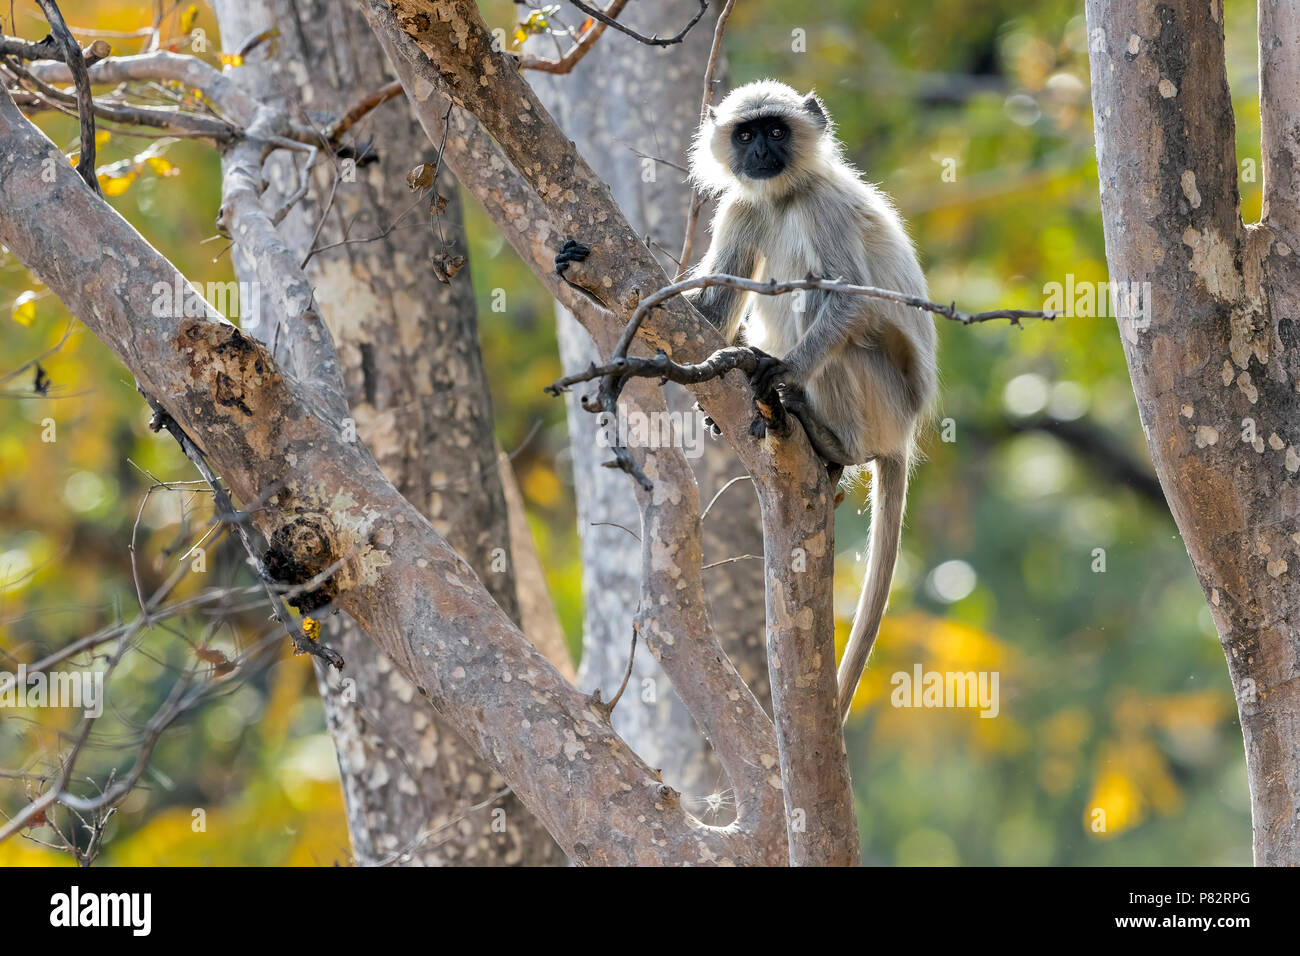 Adult Northern Plains Langur sitting on a tree in Bandavgarh NP, India. March 2017. Stock Photo